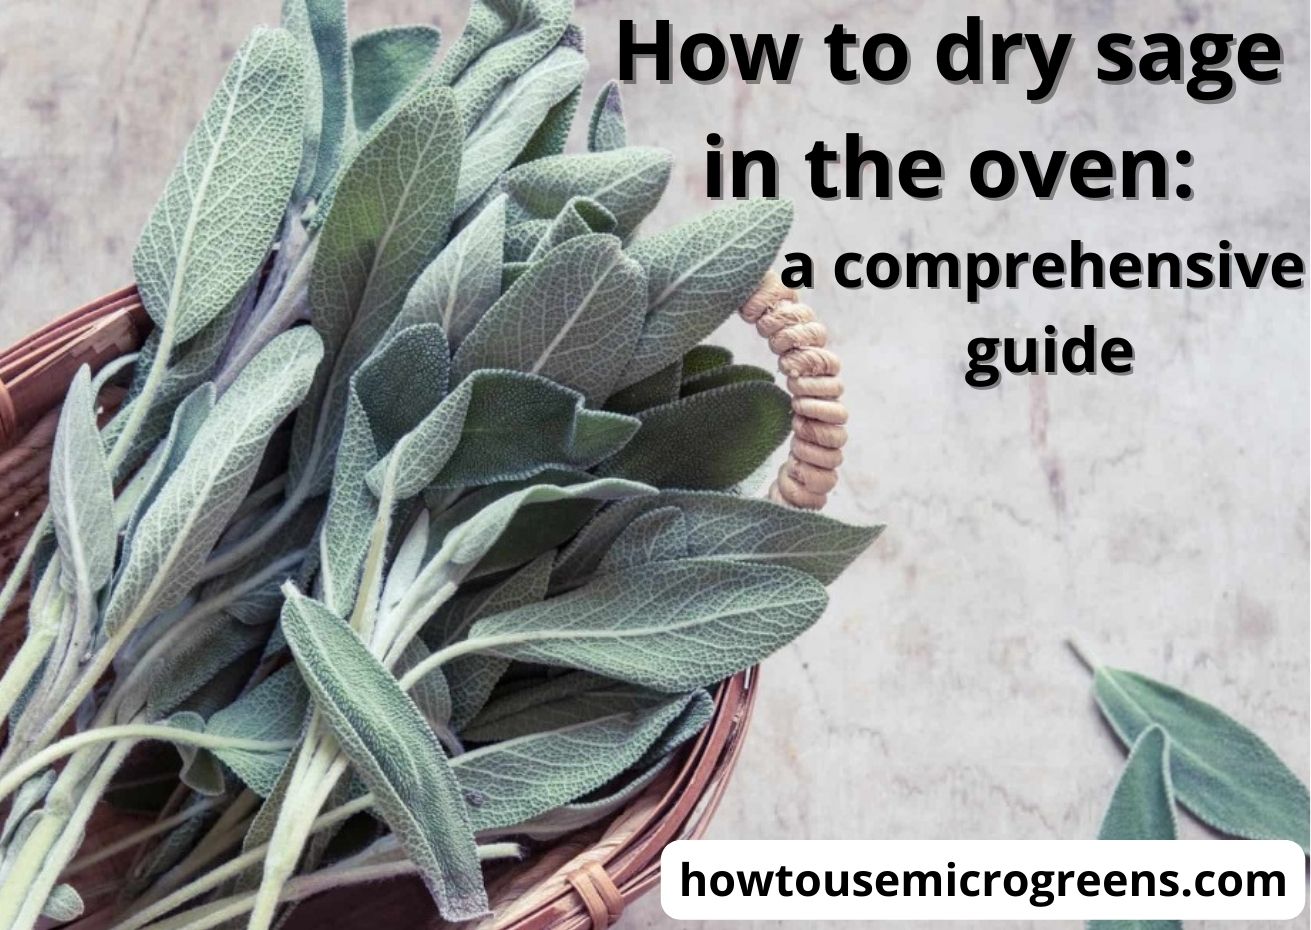 How to dry sage in the oven? 5 steps for the best results